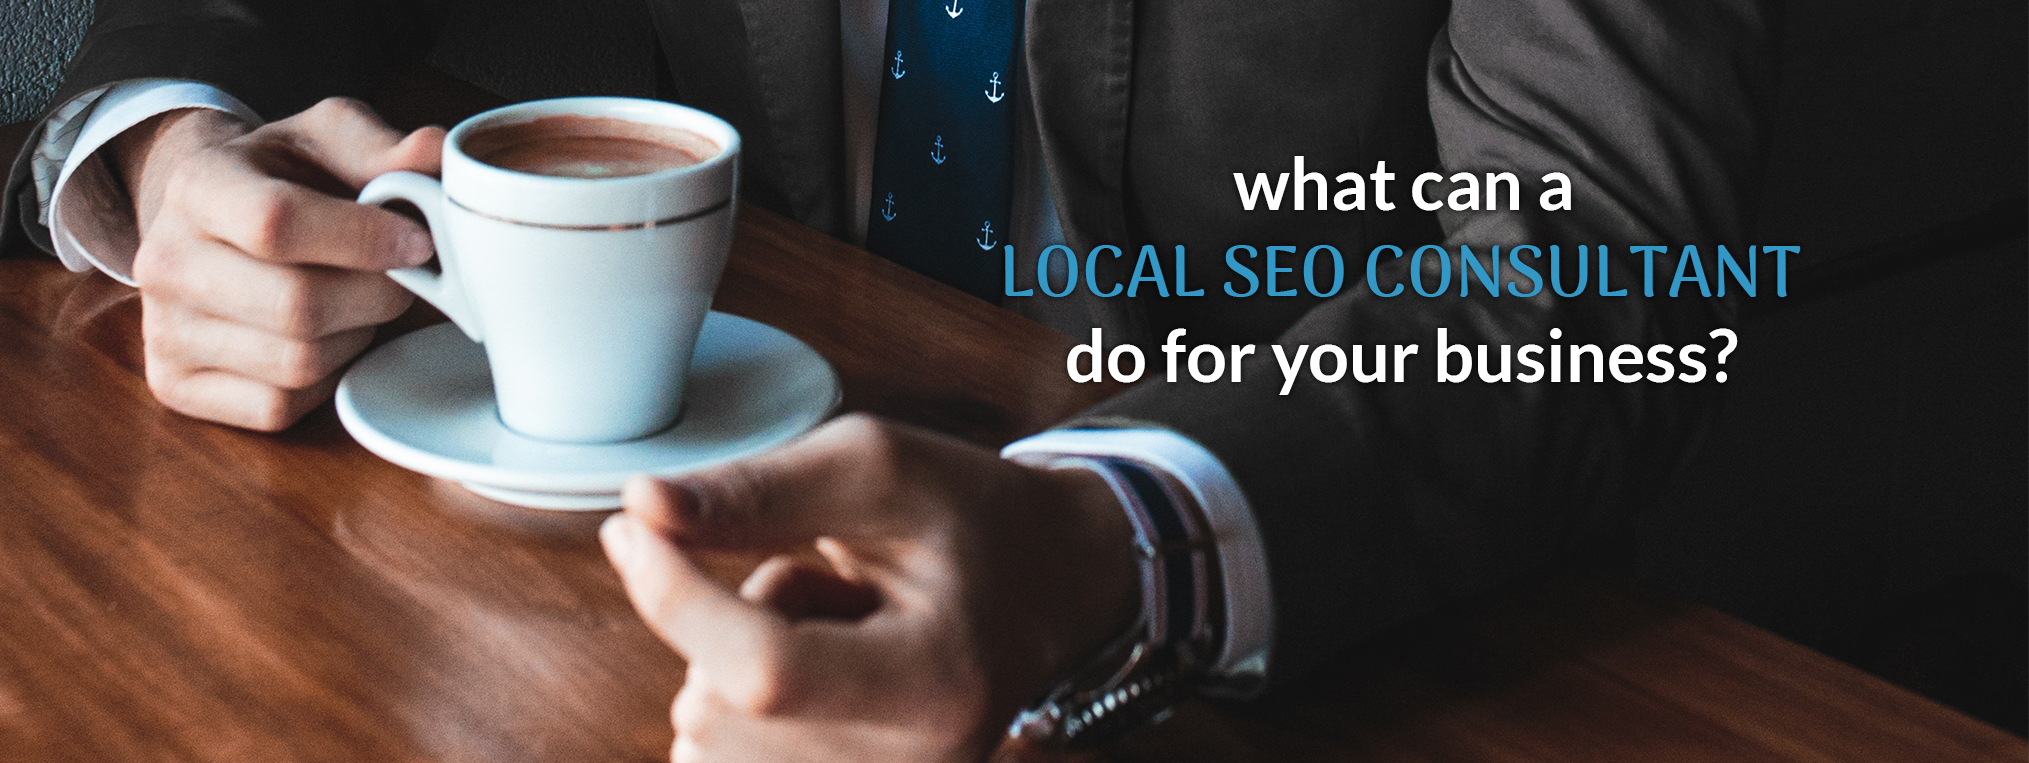 Local Seo Consultant | Why You Need an Seo Consultant for Your Local Business  